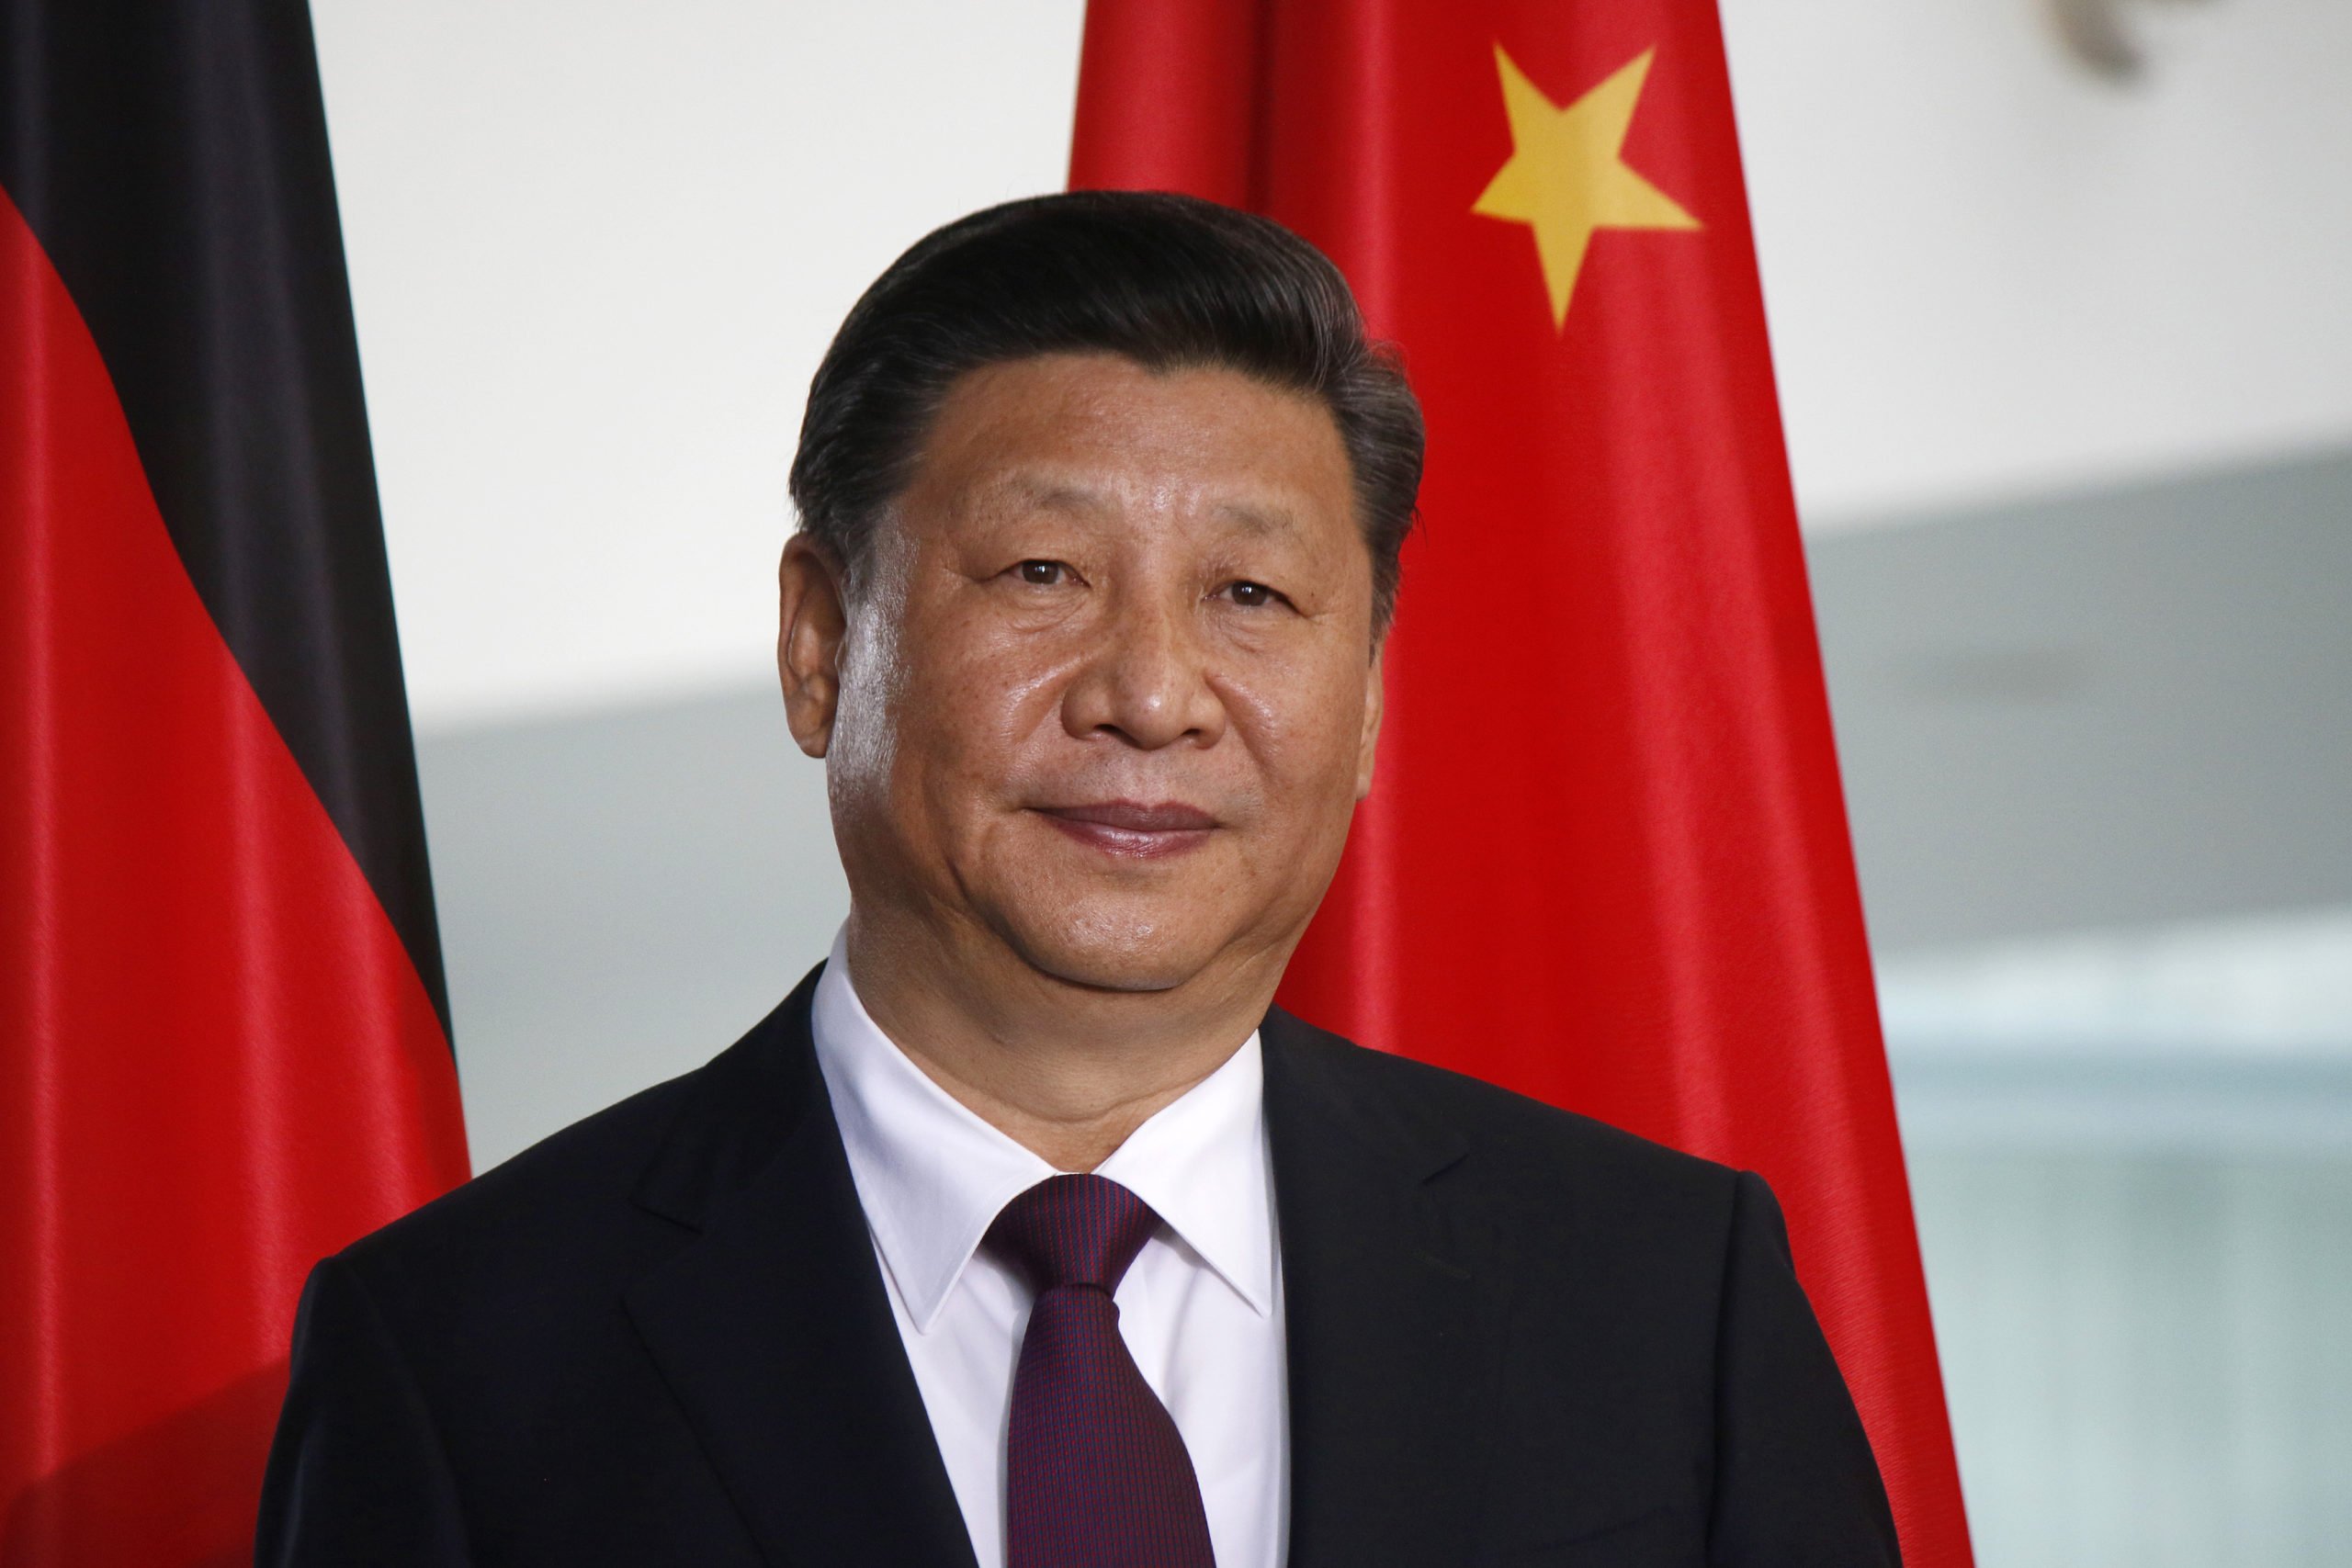 Presidental Xi boosted crypto with endorsement of blockchain technology